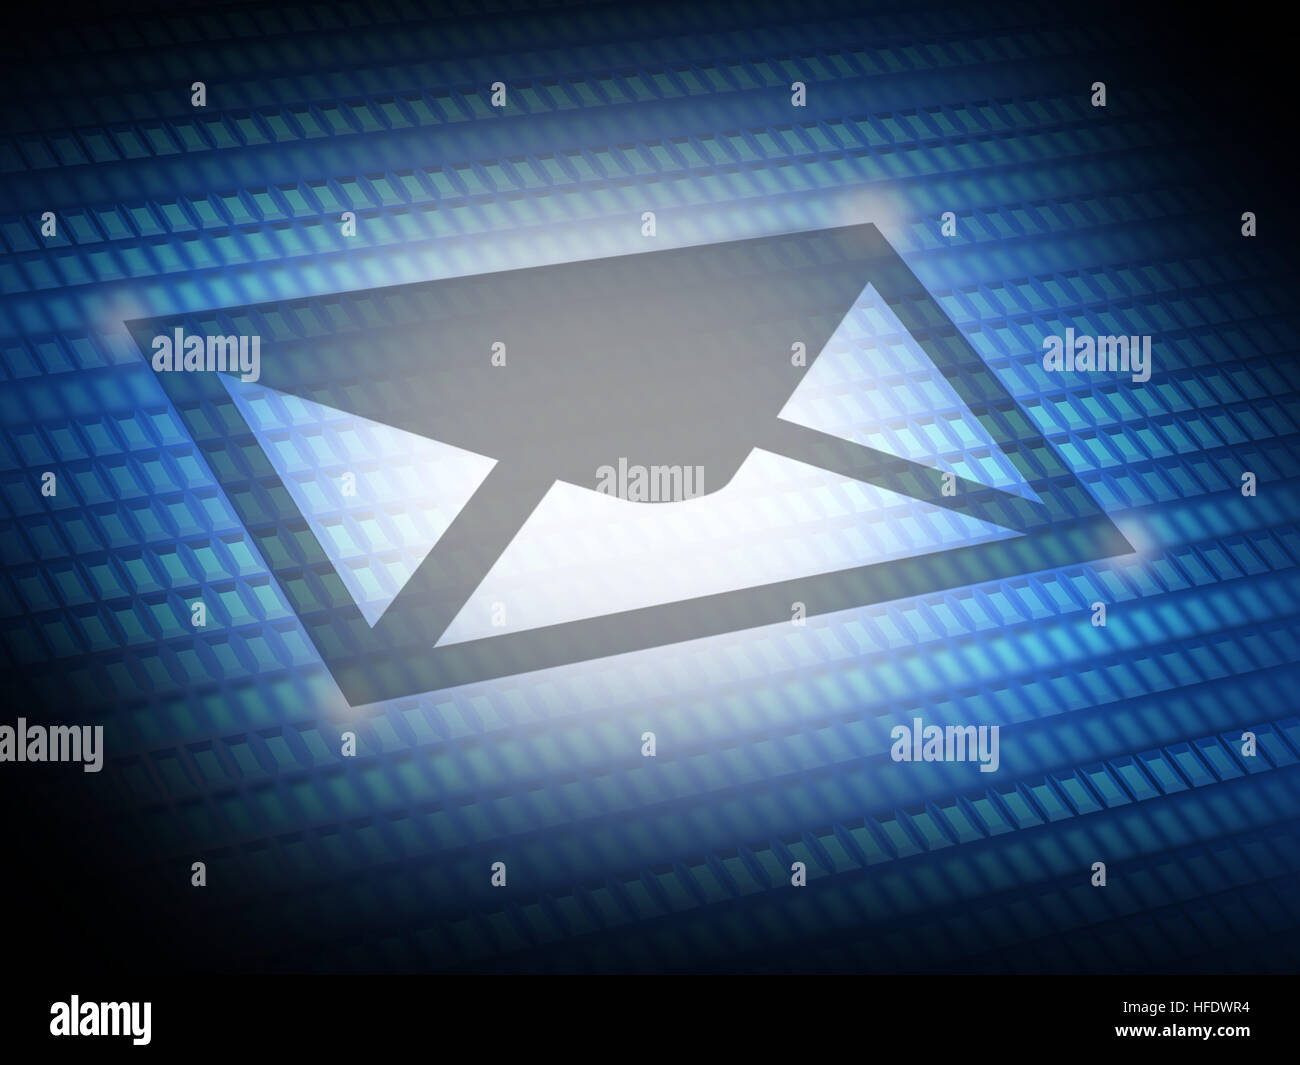 Send email icon digital image Stock Photo